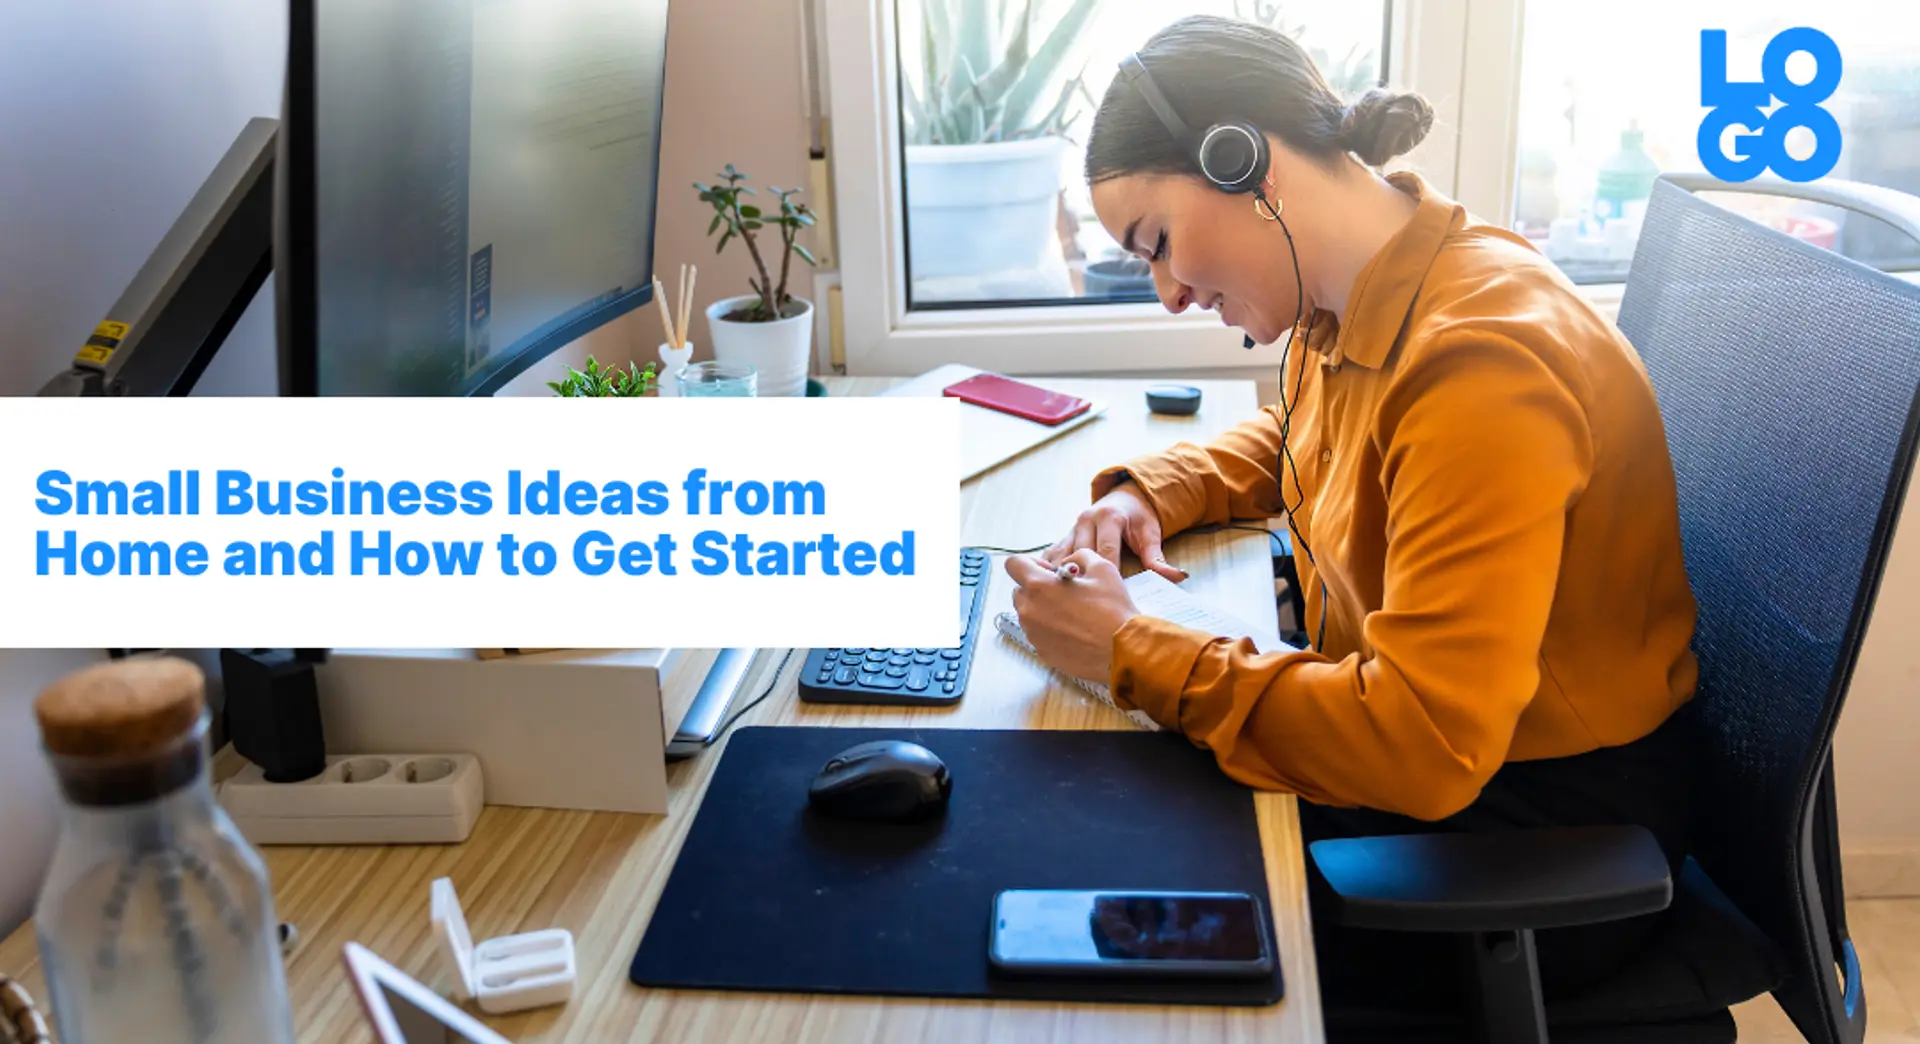 10 Small Business Ideas from Home and How to Get Started